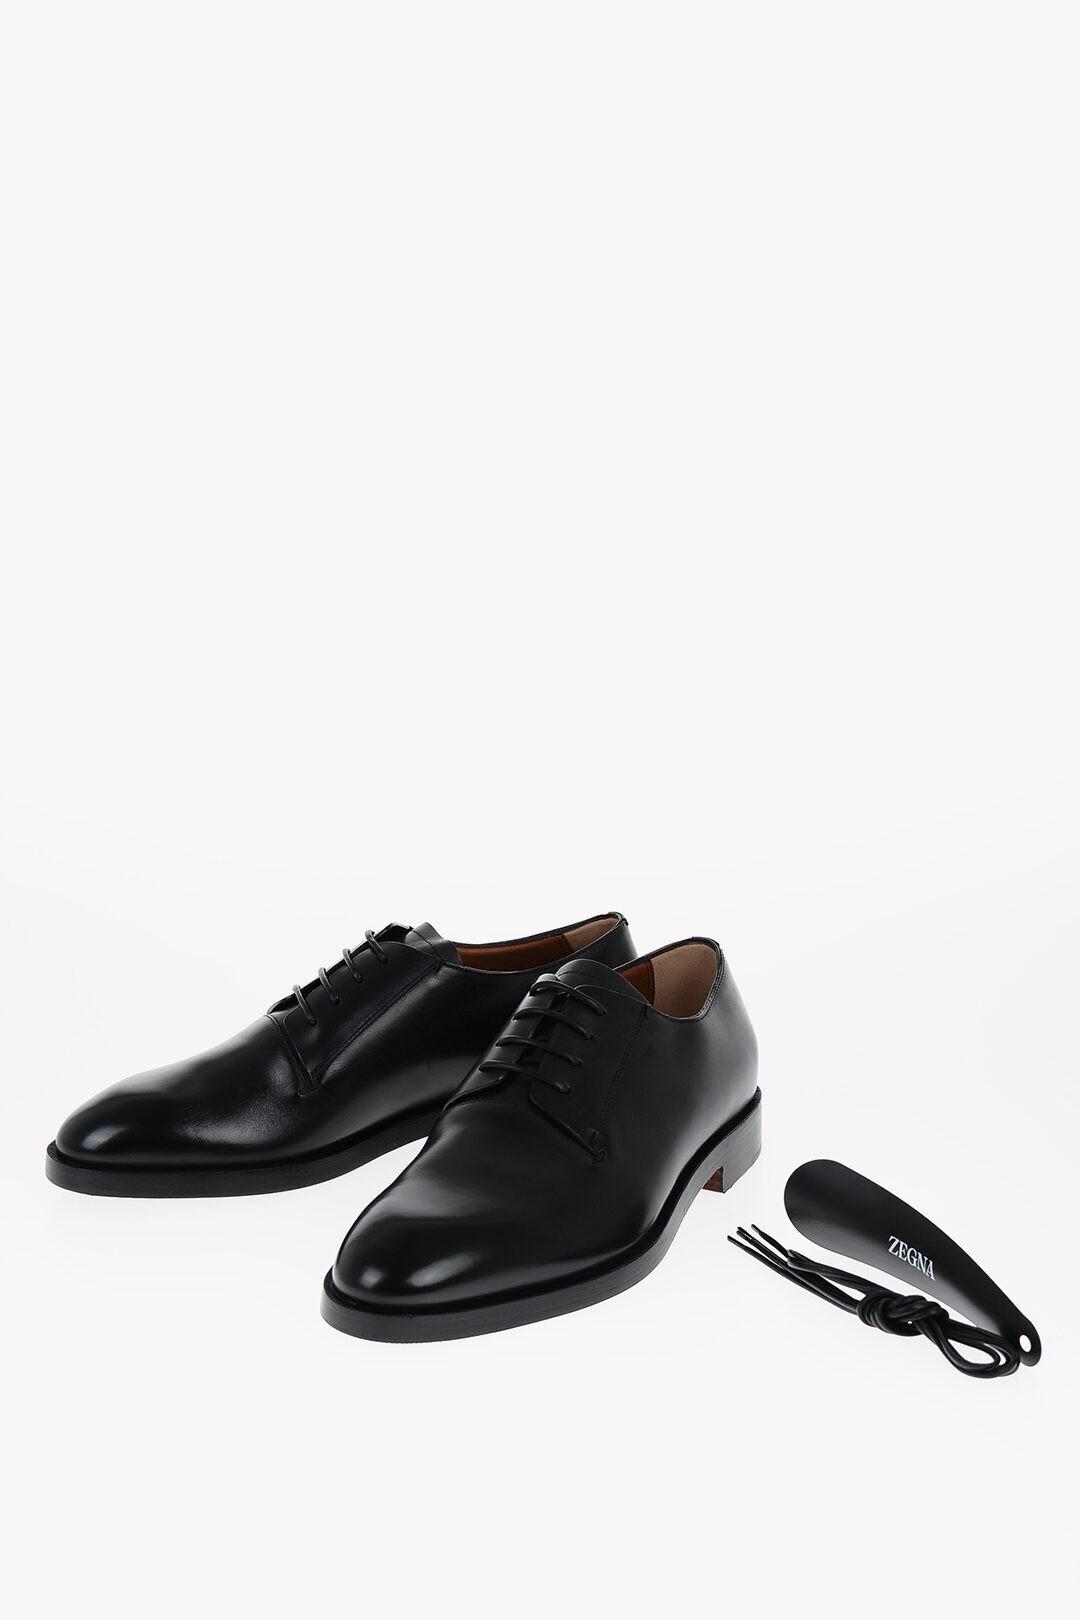 ZEGNA ゼニア ドレスシューズ LHCLG A5582Z NER メンズ LEATHER TORINO OXFORD SHOES 【関税 送料無料】【ラッピング無料】 dk